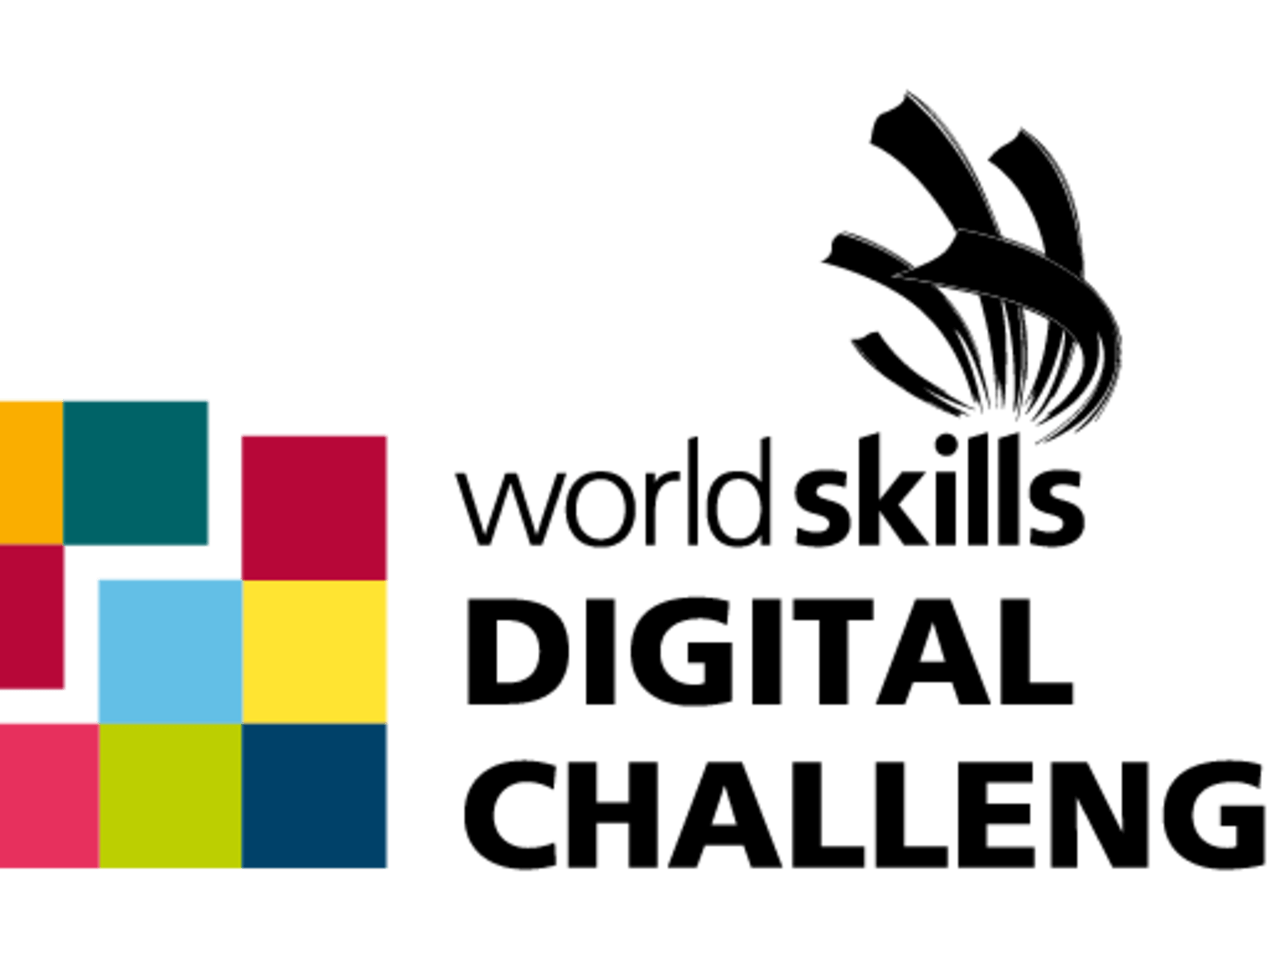 Introducing the Champions for WorldSkills Digital Challenge